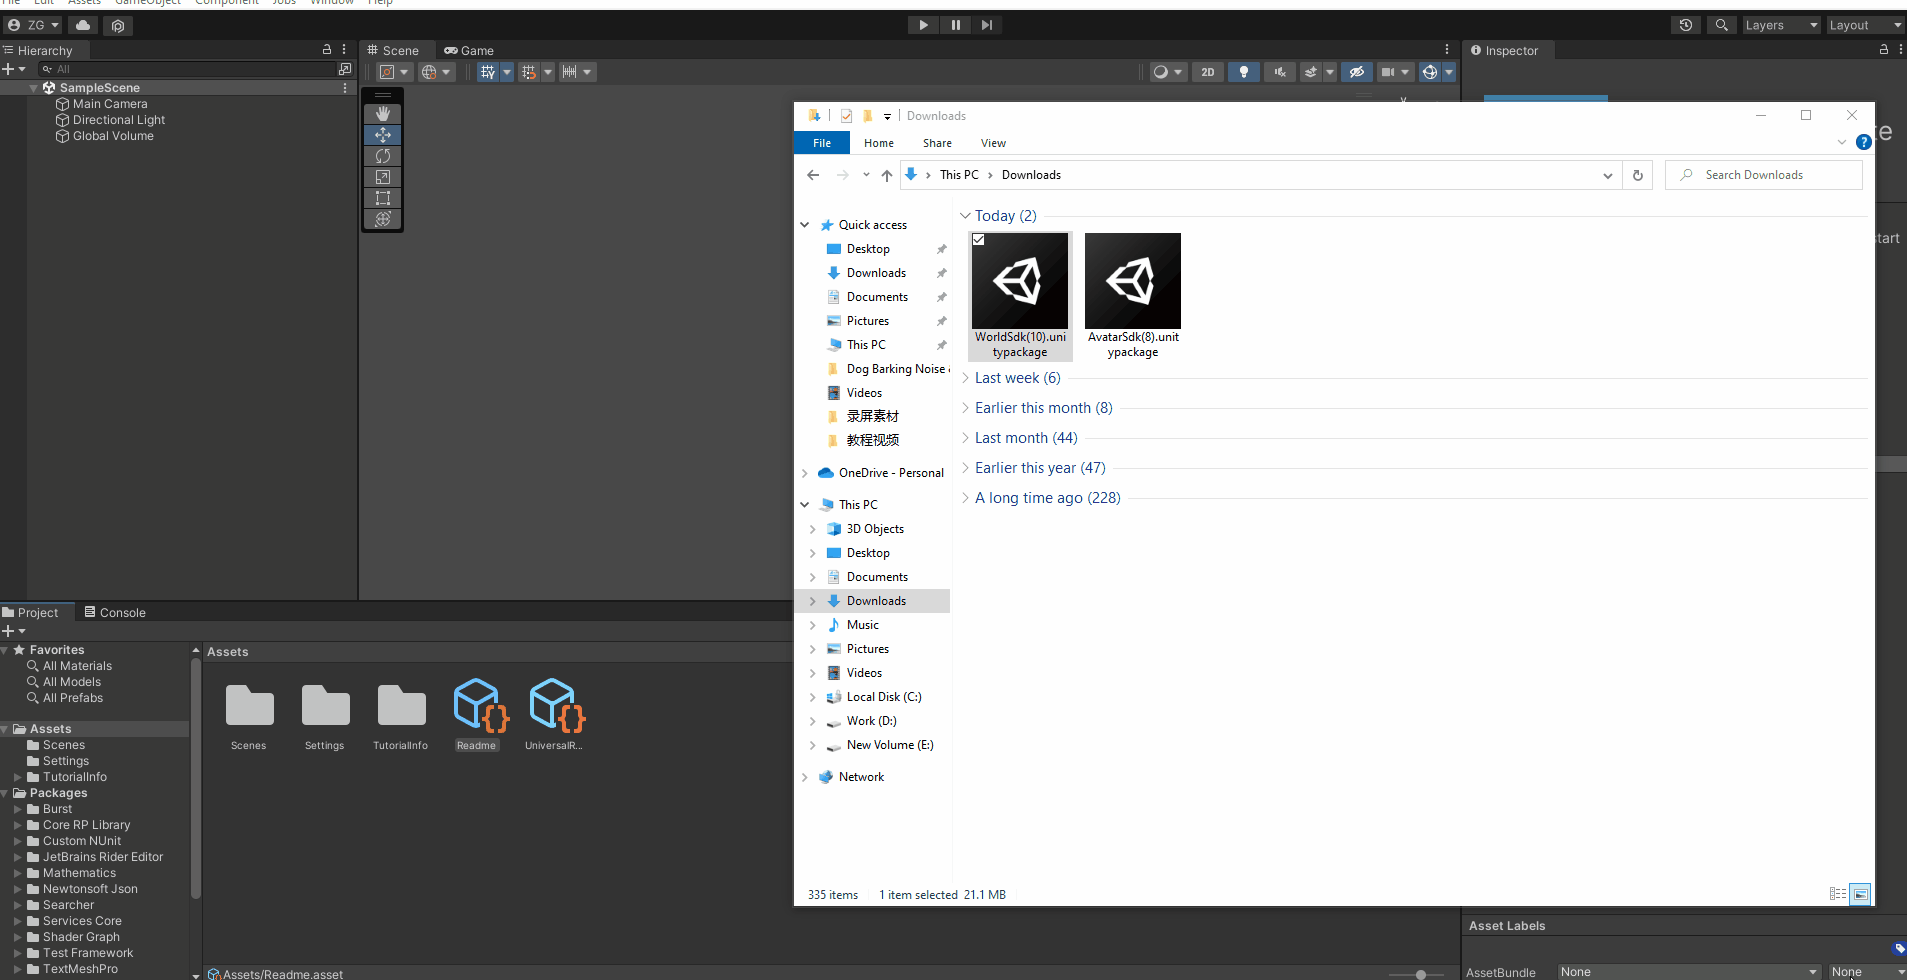 How come uploading custom avatar creates a Root part? - Building